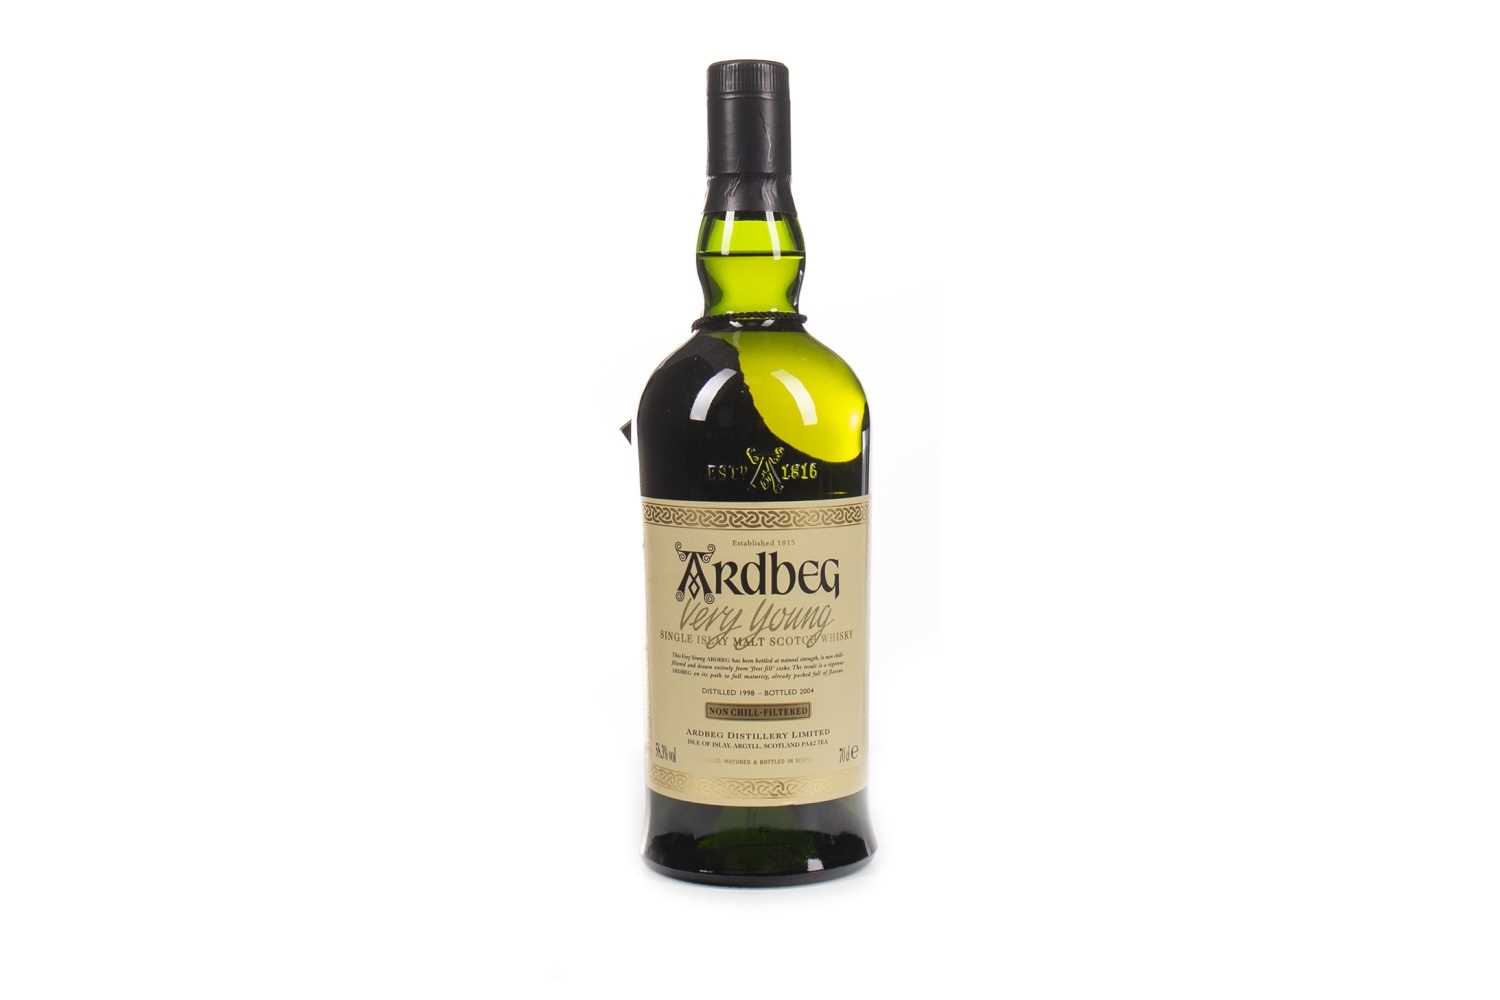 Lot 191 - ARDBEG 1998 VERY YOUNG